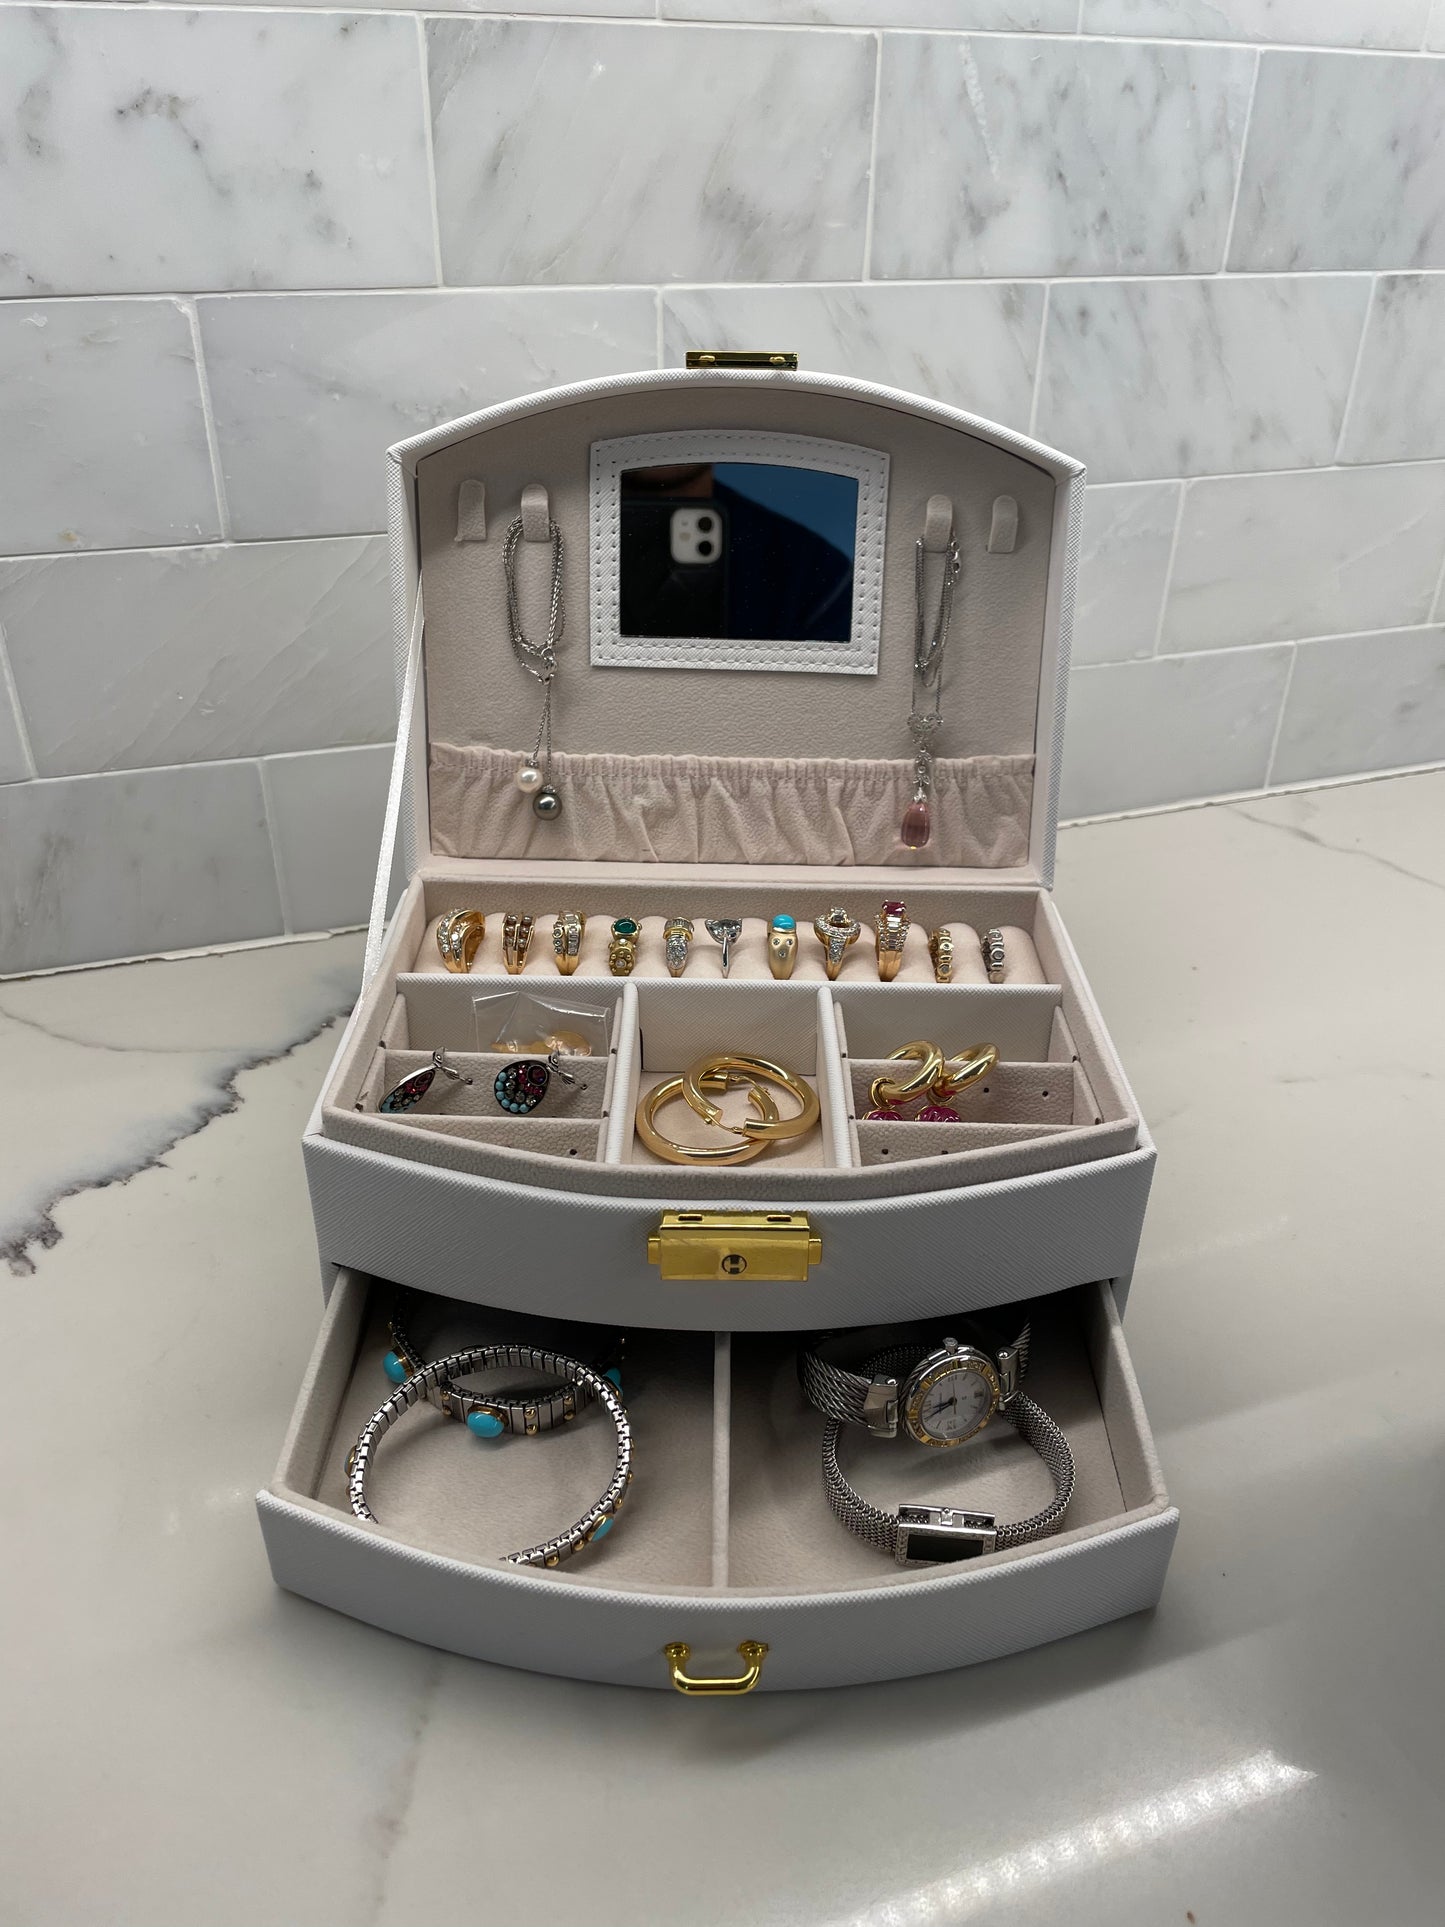 White Personalized Large Jewelry Box with Drawer, Carrying Handle, and a Lock and key